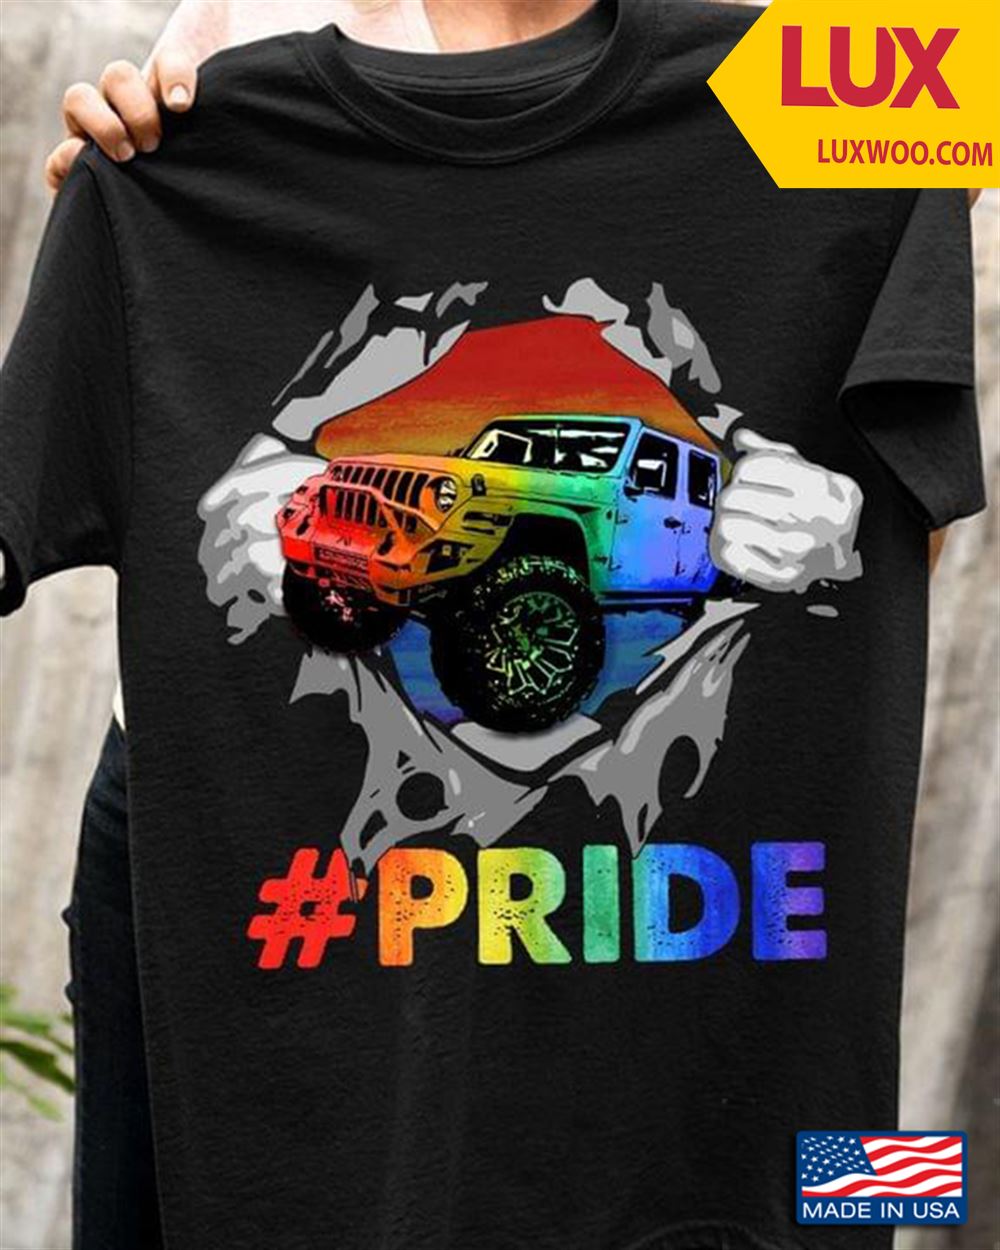 Jeep Pride Lgbt Shirt Size Up To 5xl